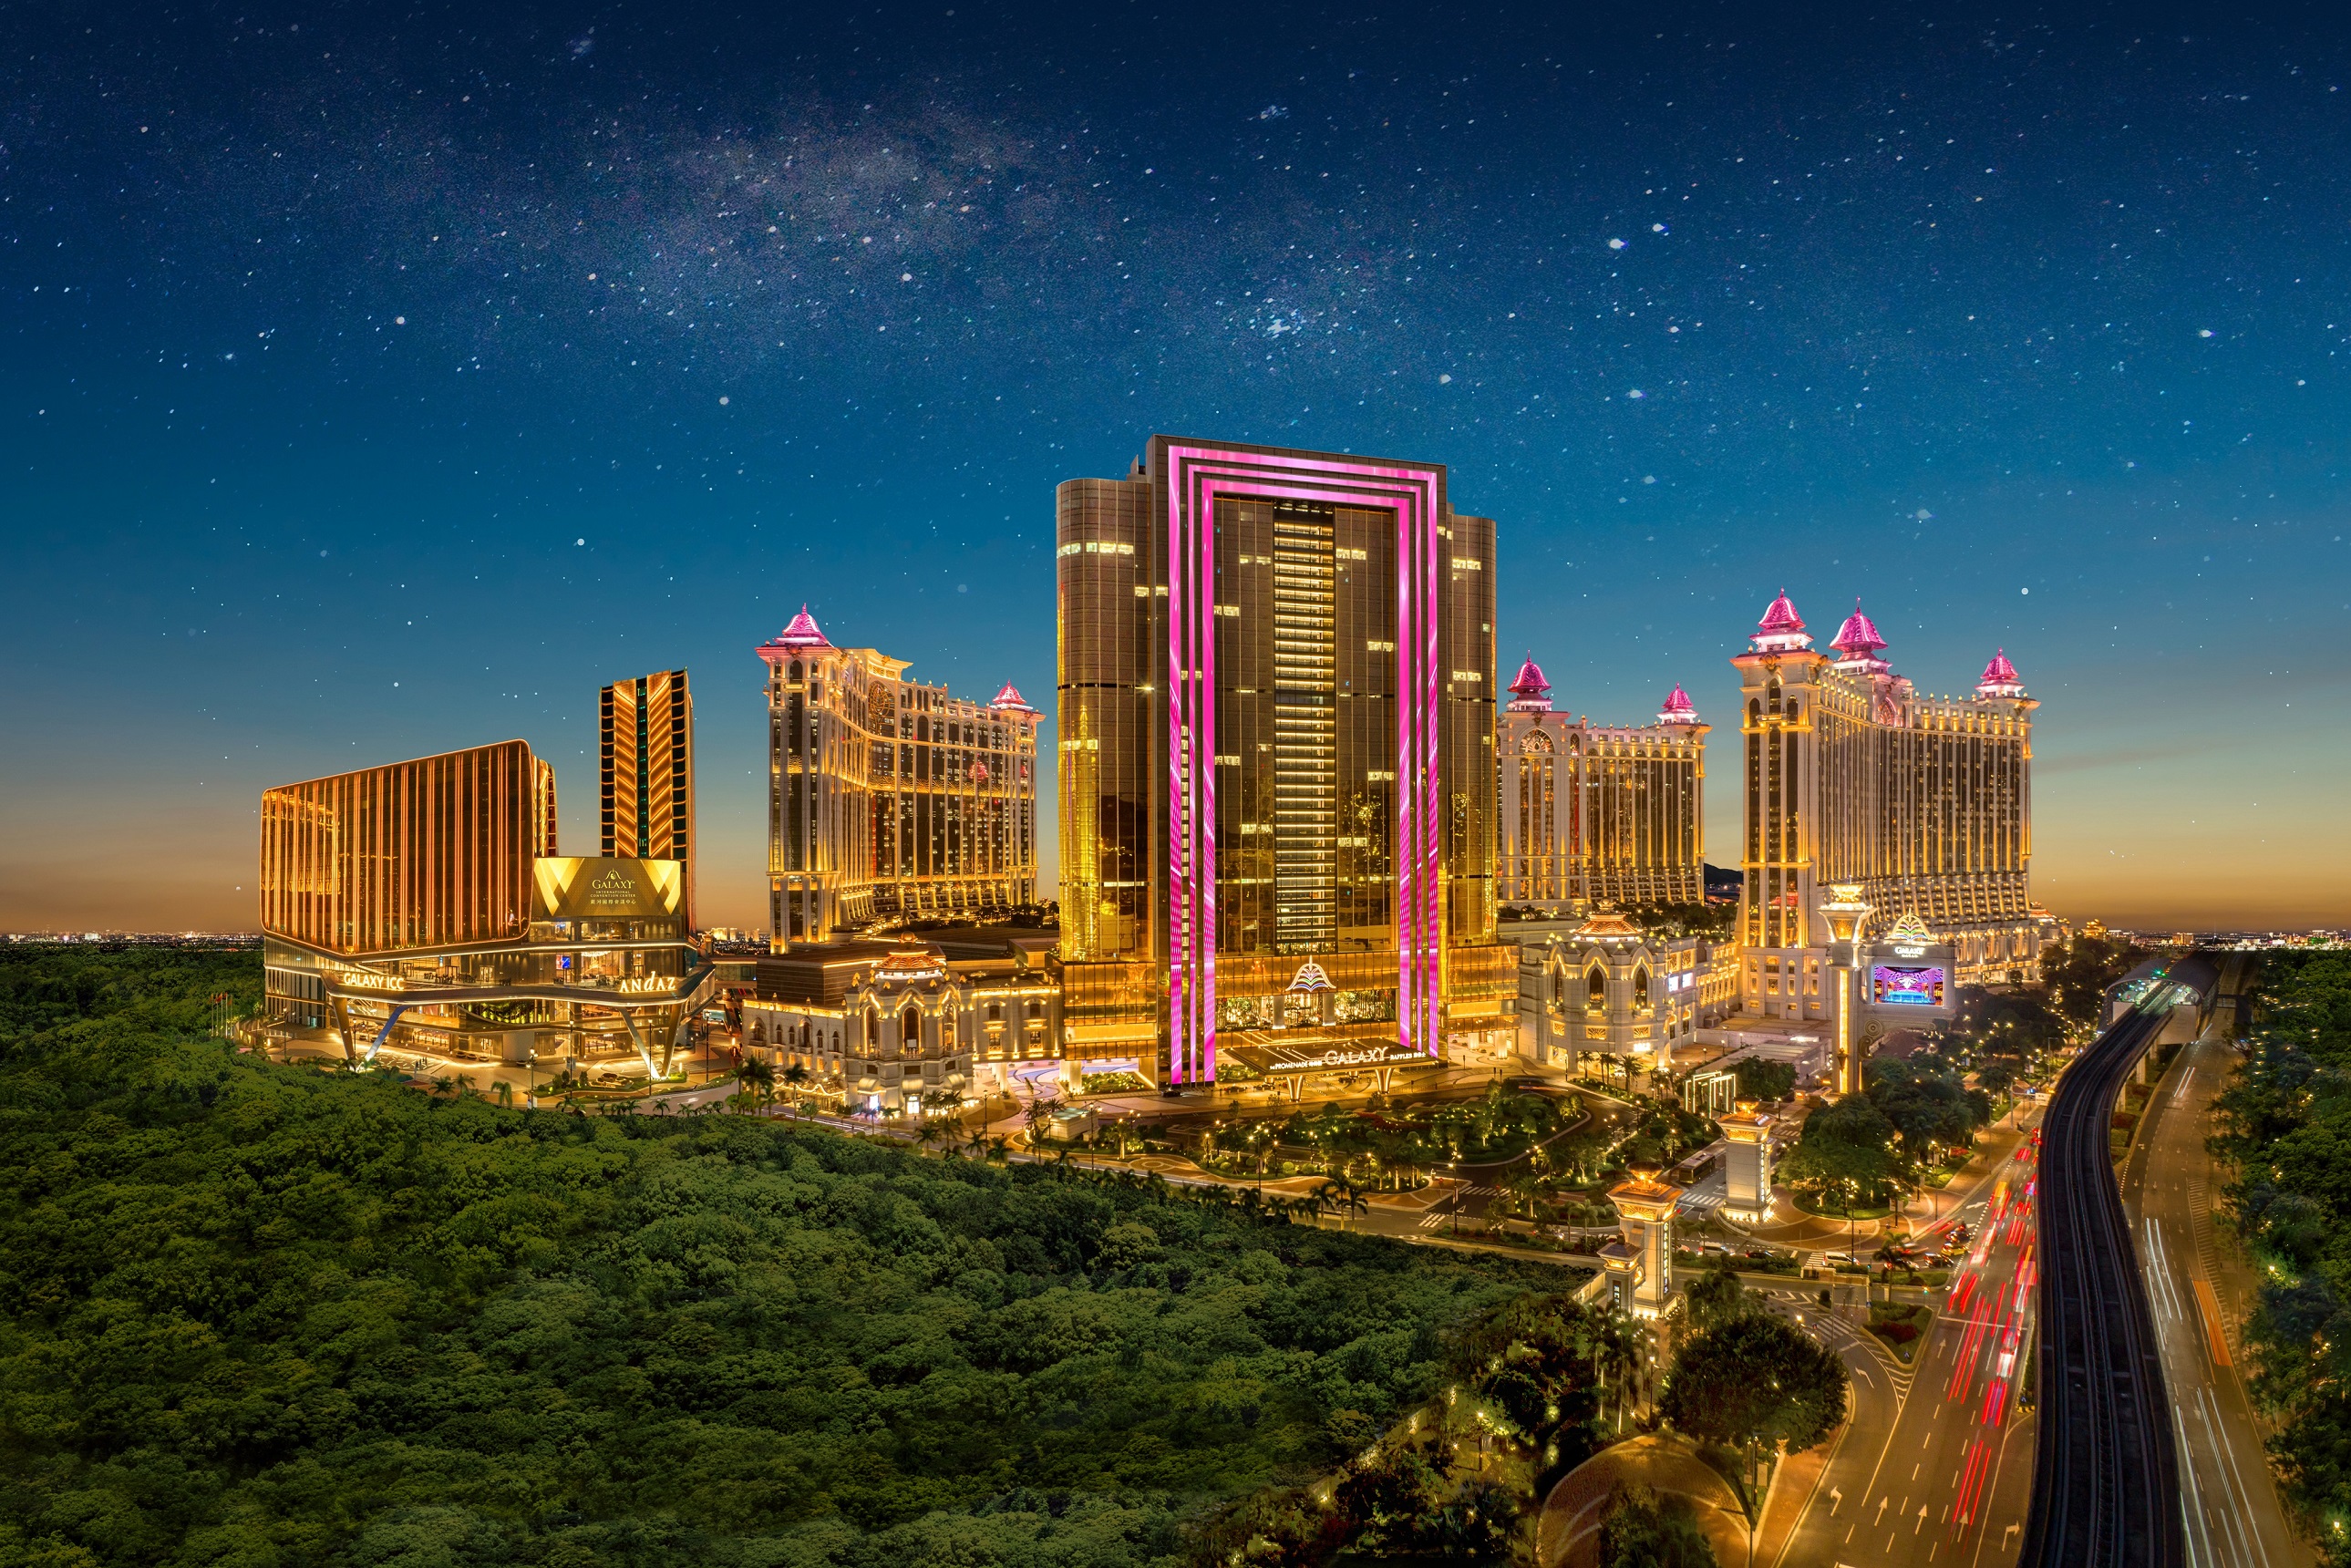 Galaxy Macau ranked in ‘China’s Top 100 Hotels’ by Travel + Leisure China.